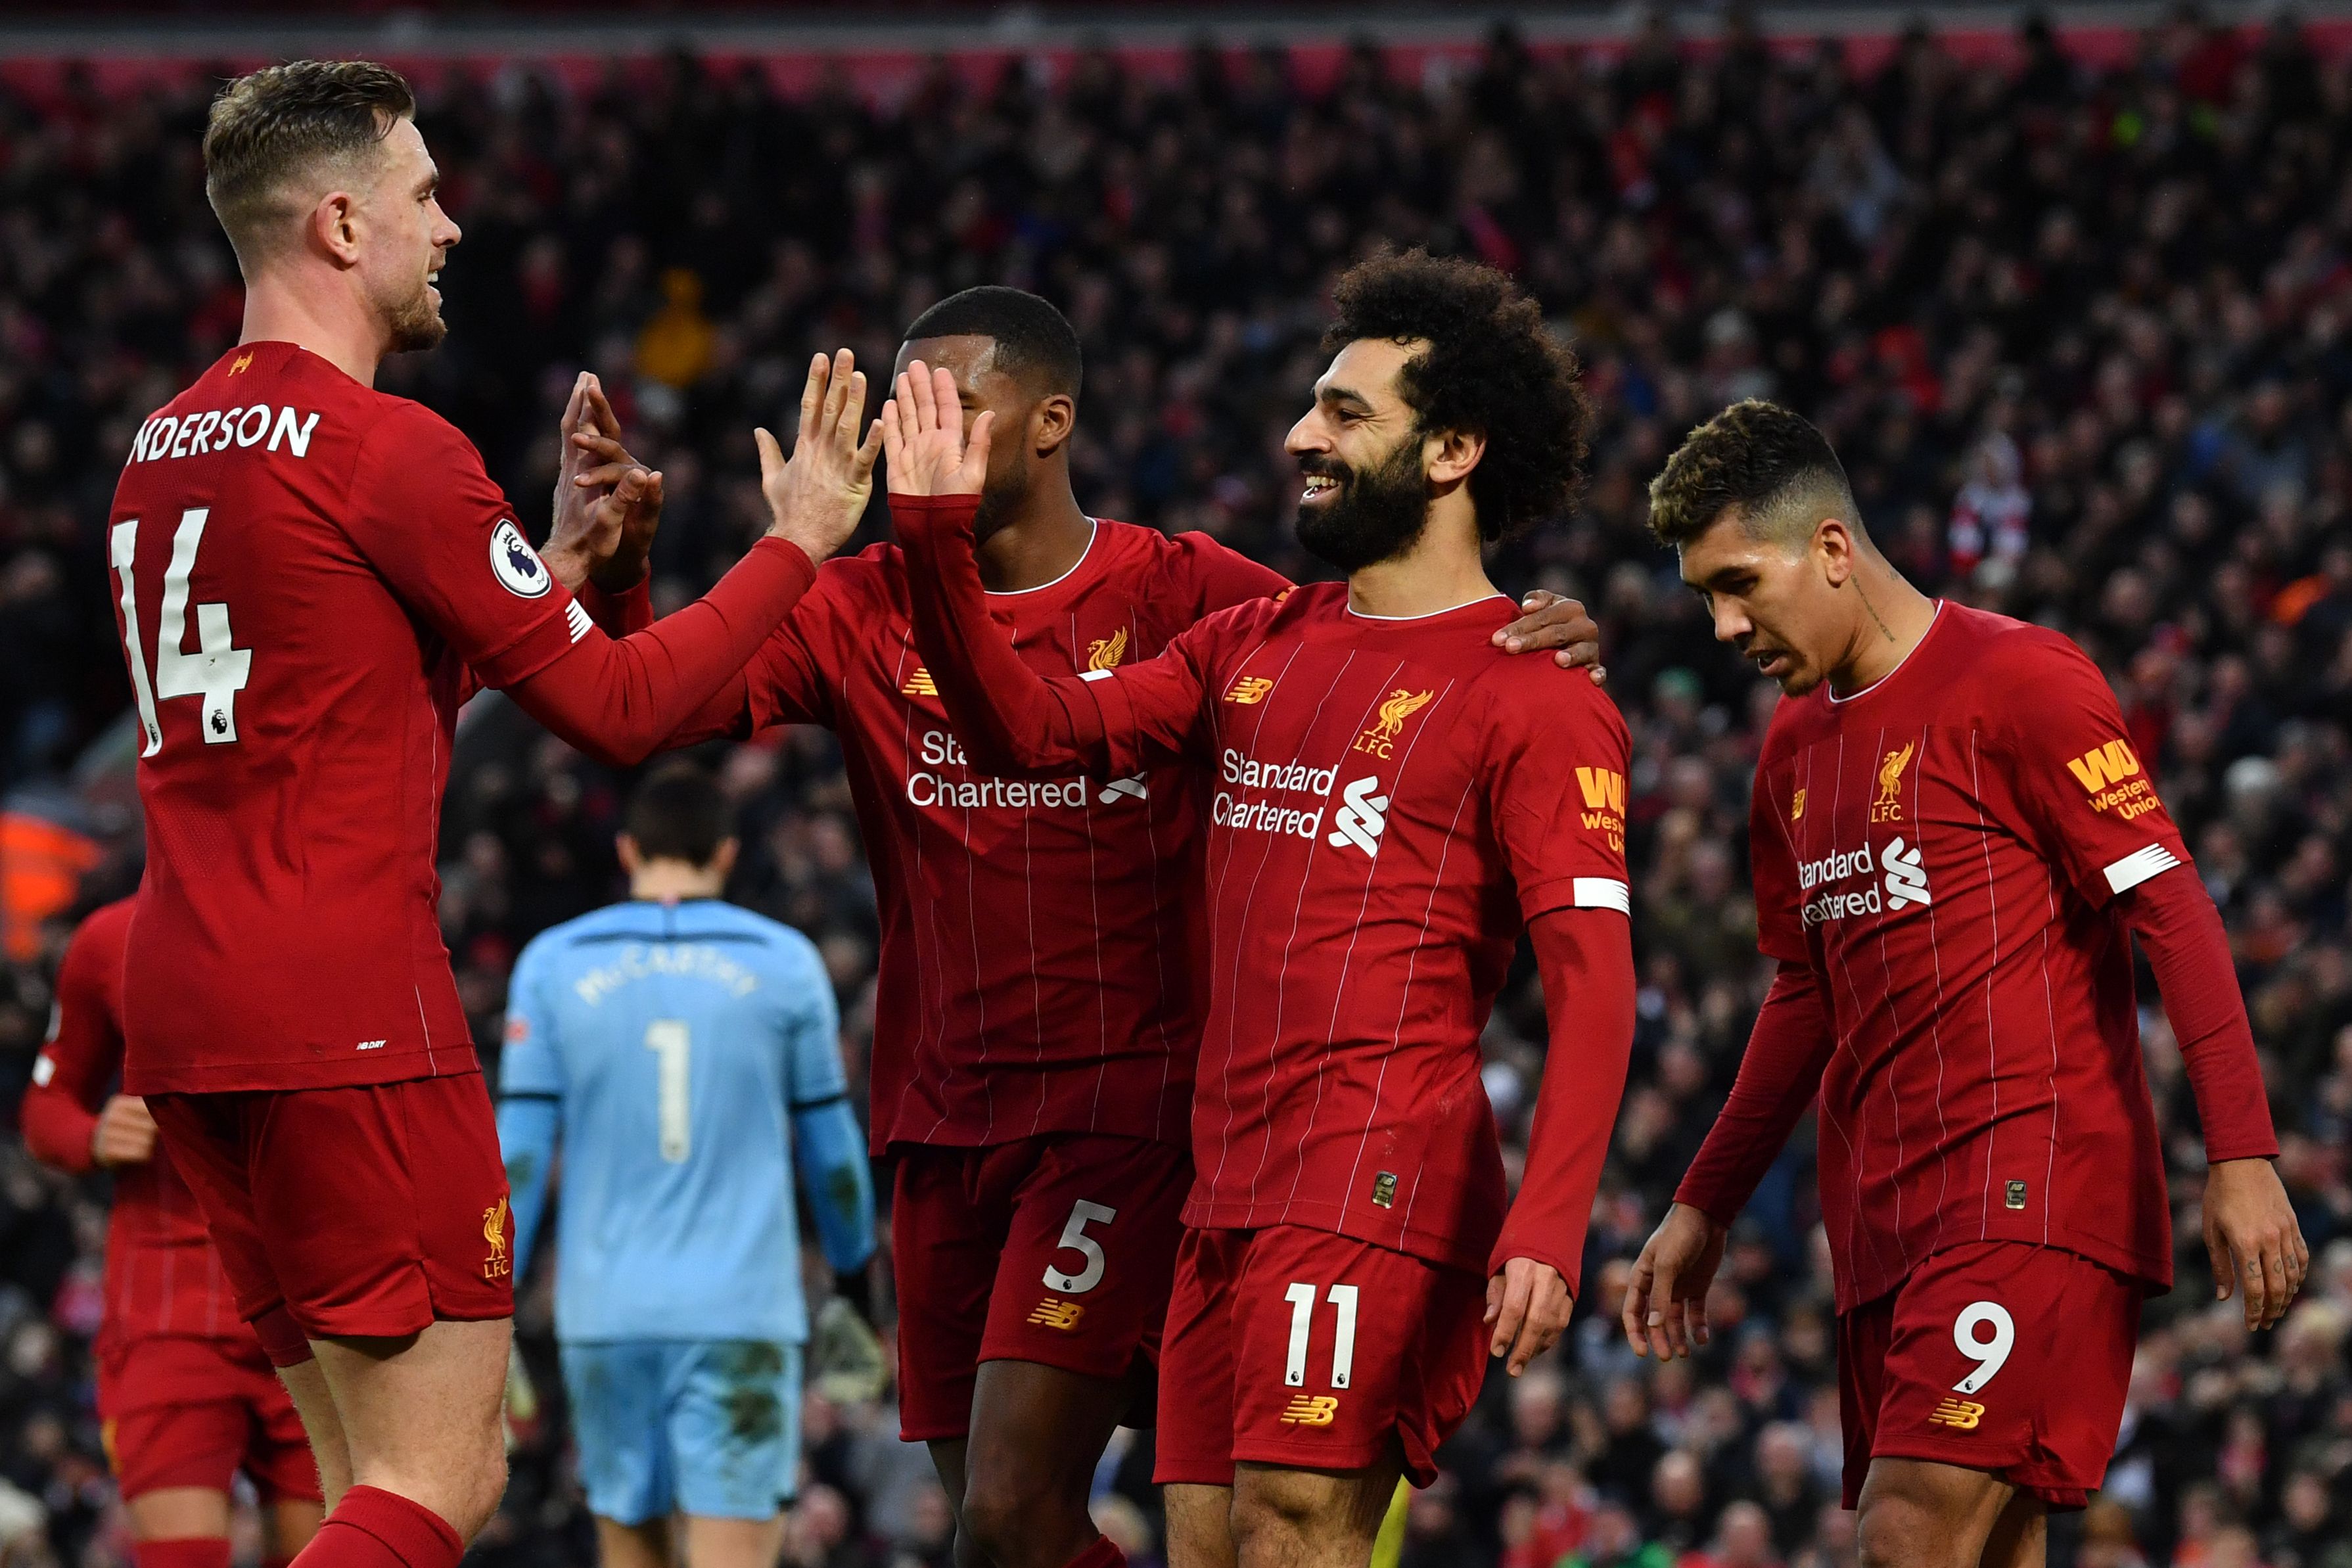 Liverpool's Egyptian midfielder Mohamed Salah (C) celebrates with teammates after scoring his team's third goal during the English Premier League football match between Liverpool and Southampton at Anfield in Liverpool, north west England on February 1, 2020. (Photo by Paul ELLIS / AFP) / RESTRICTED TO EDITORIAL USE. No use with unauthorized audio, video, data, fixture lists, club/league logos or 'live' services. Online in-match use limited to 120 images. An additional 40 images may be used in extra time. No video emulation. Social media in-match use limited to 120 images. An additional 40 images may be used in extra time. No use in betting publications, games or single club/league/player publications. /  (Photo by PAUL ELLIS/AFP via Getty Images)